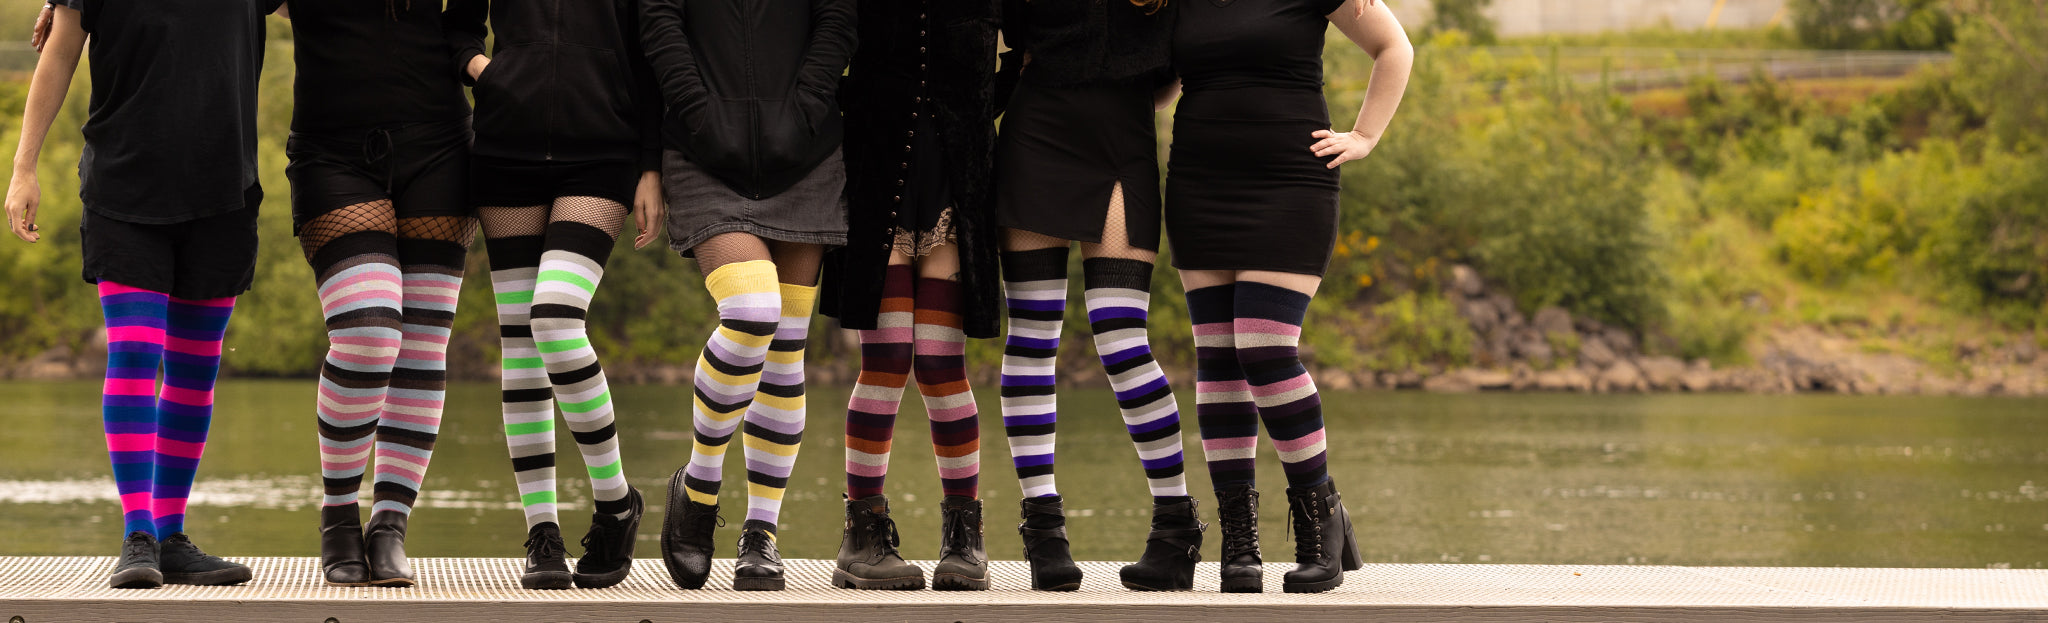 Seven people, each one wearing a pair of thigh high socks patterned after a different LGBTQIA+ pride flag. They stand in a row with arms around each other's shoulders.